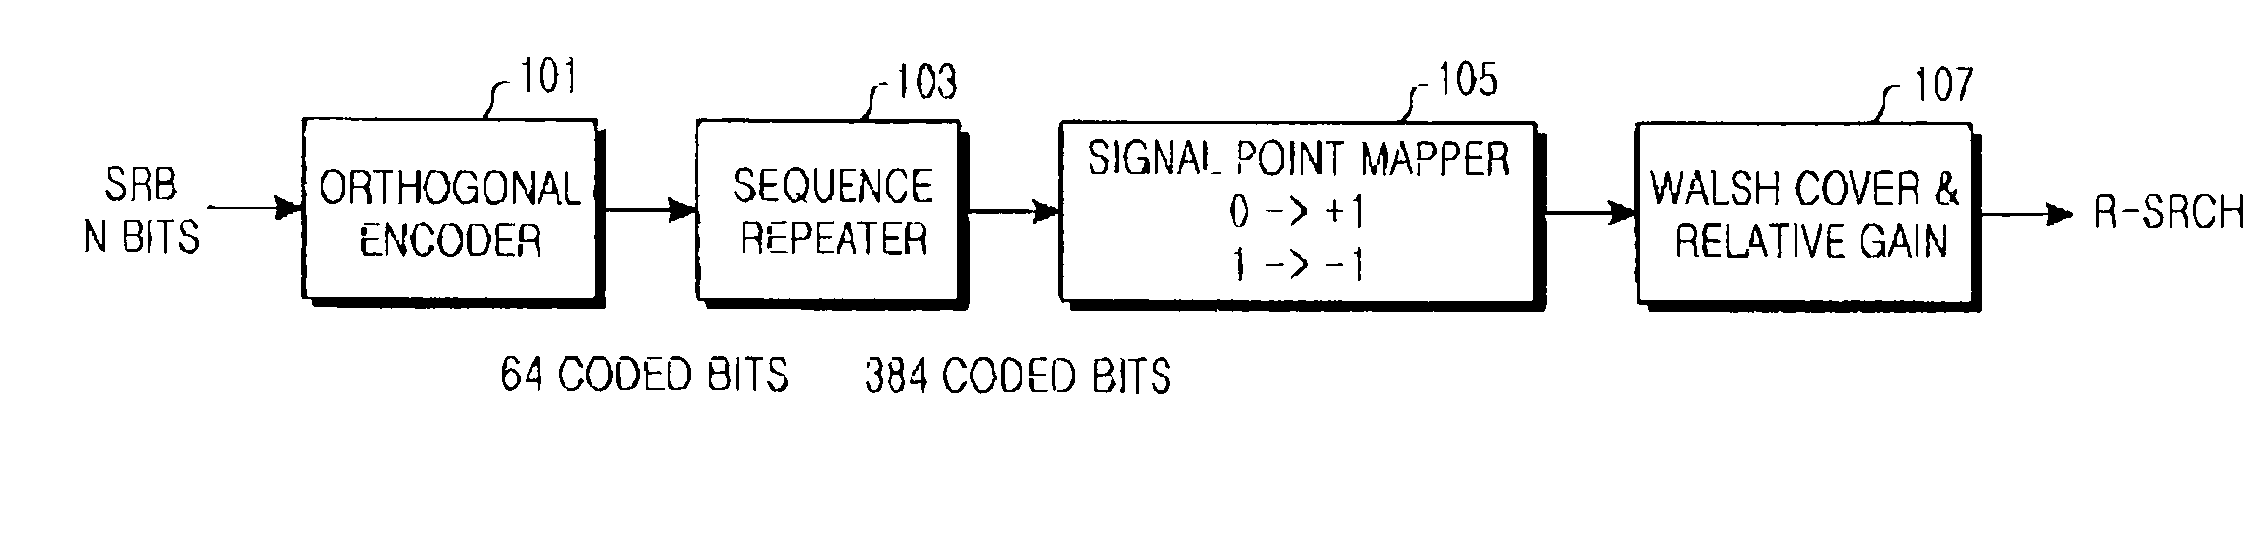 Apparatus and method for controlling reverse link data rate of packet data in mobile communication system